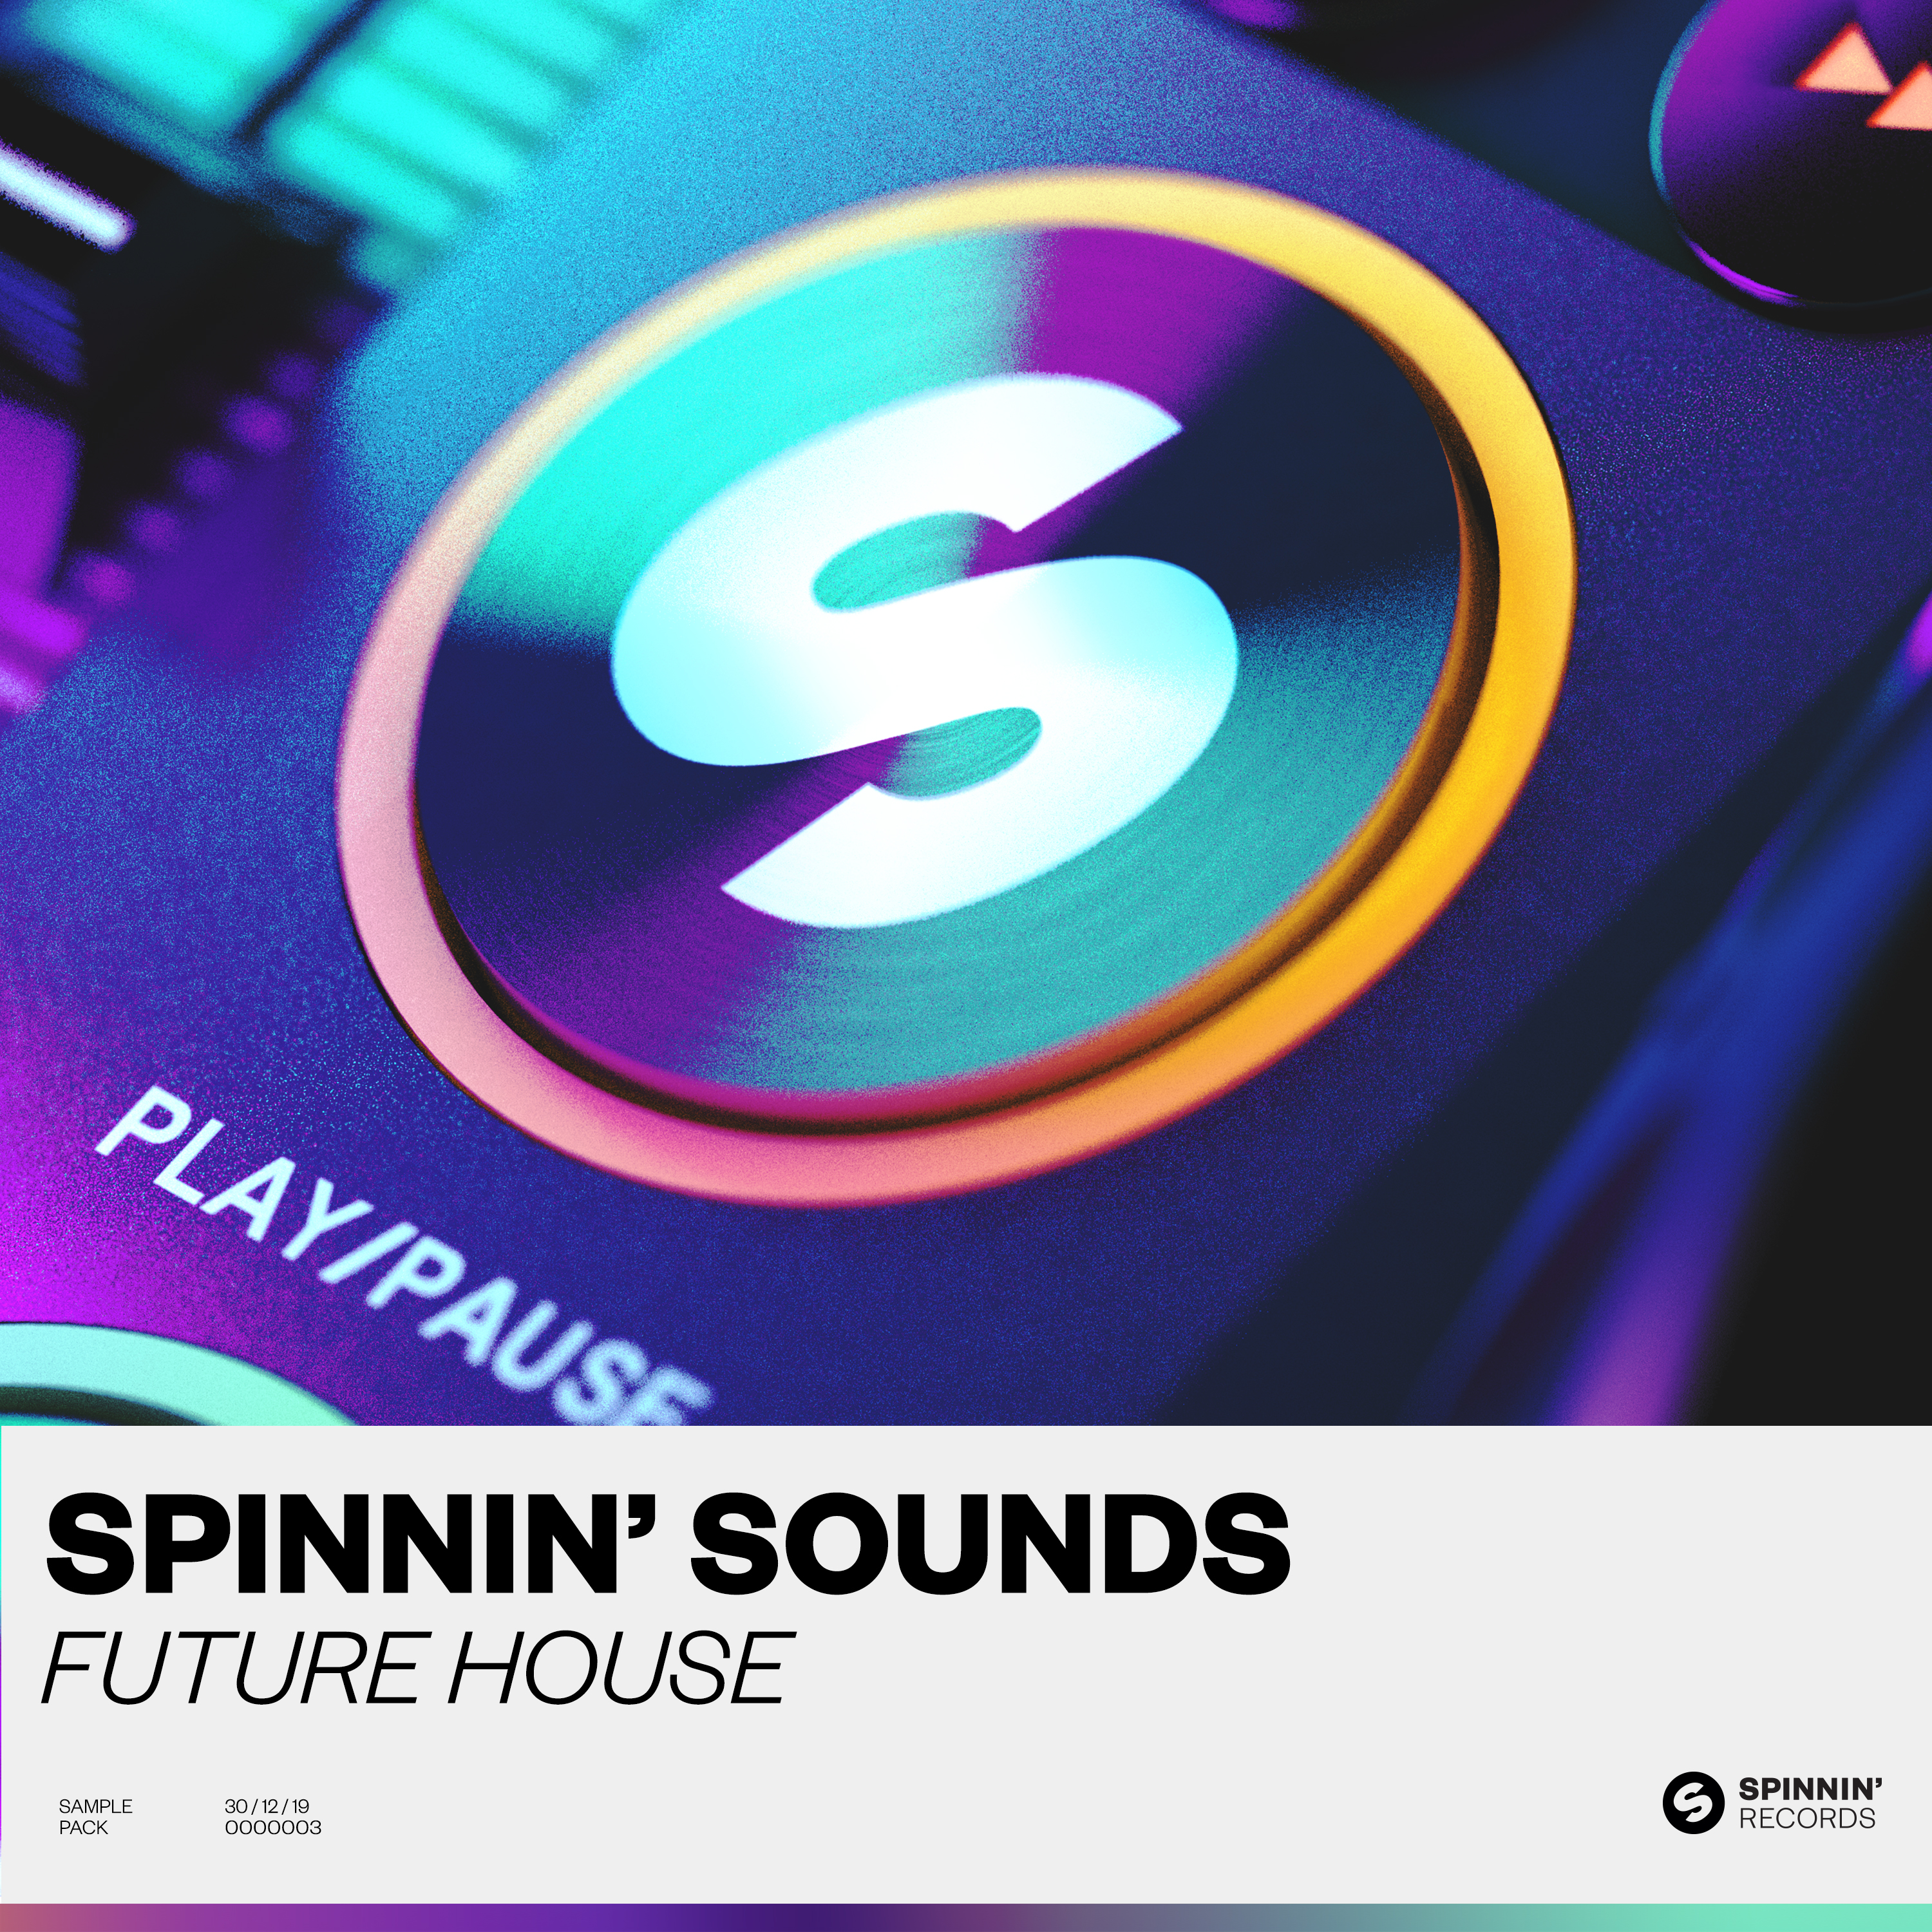 Spinnin' Records with 2 sample packs in Splice top 10!, News